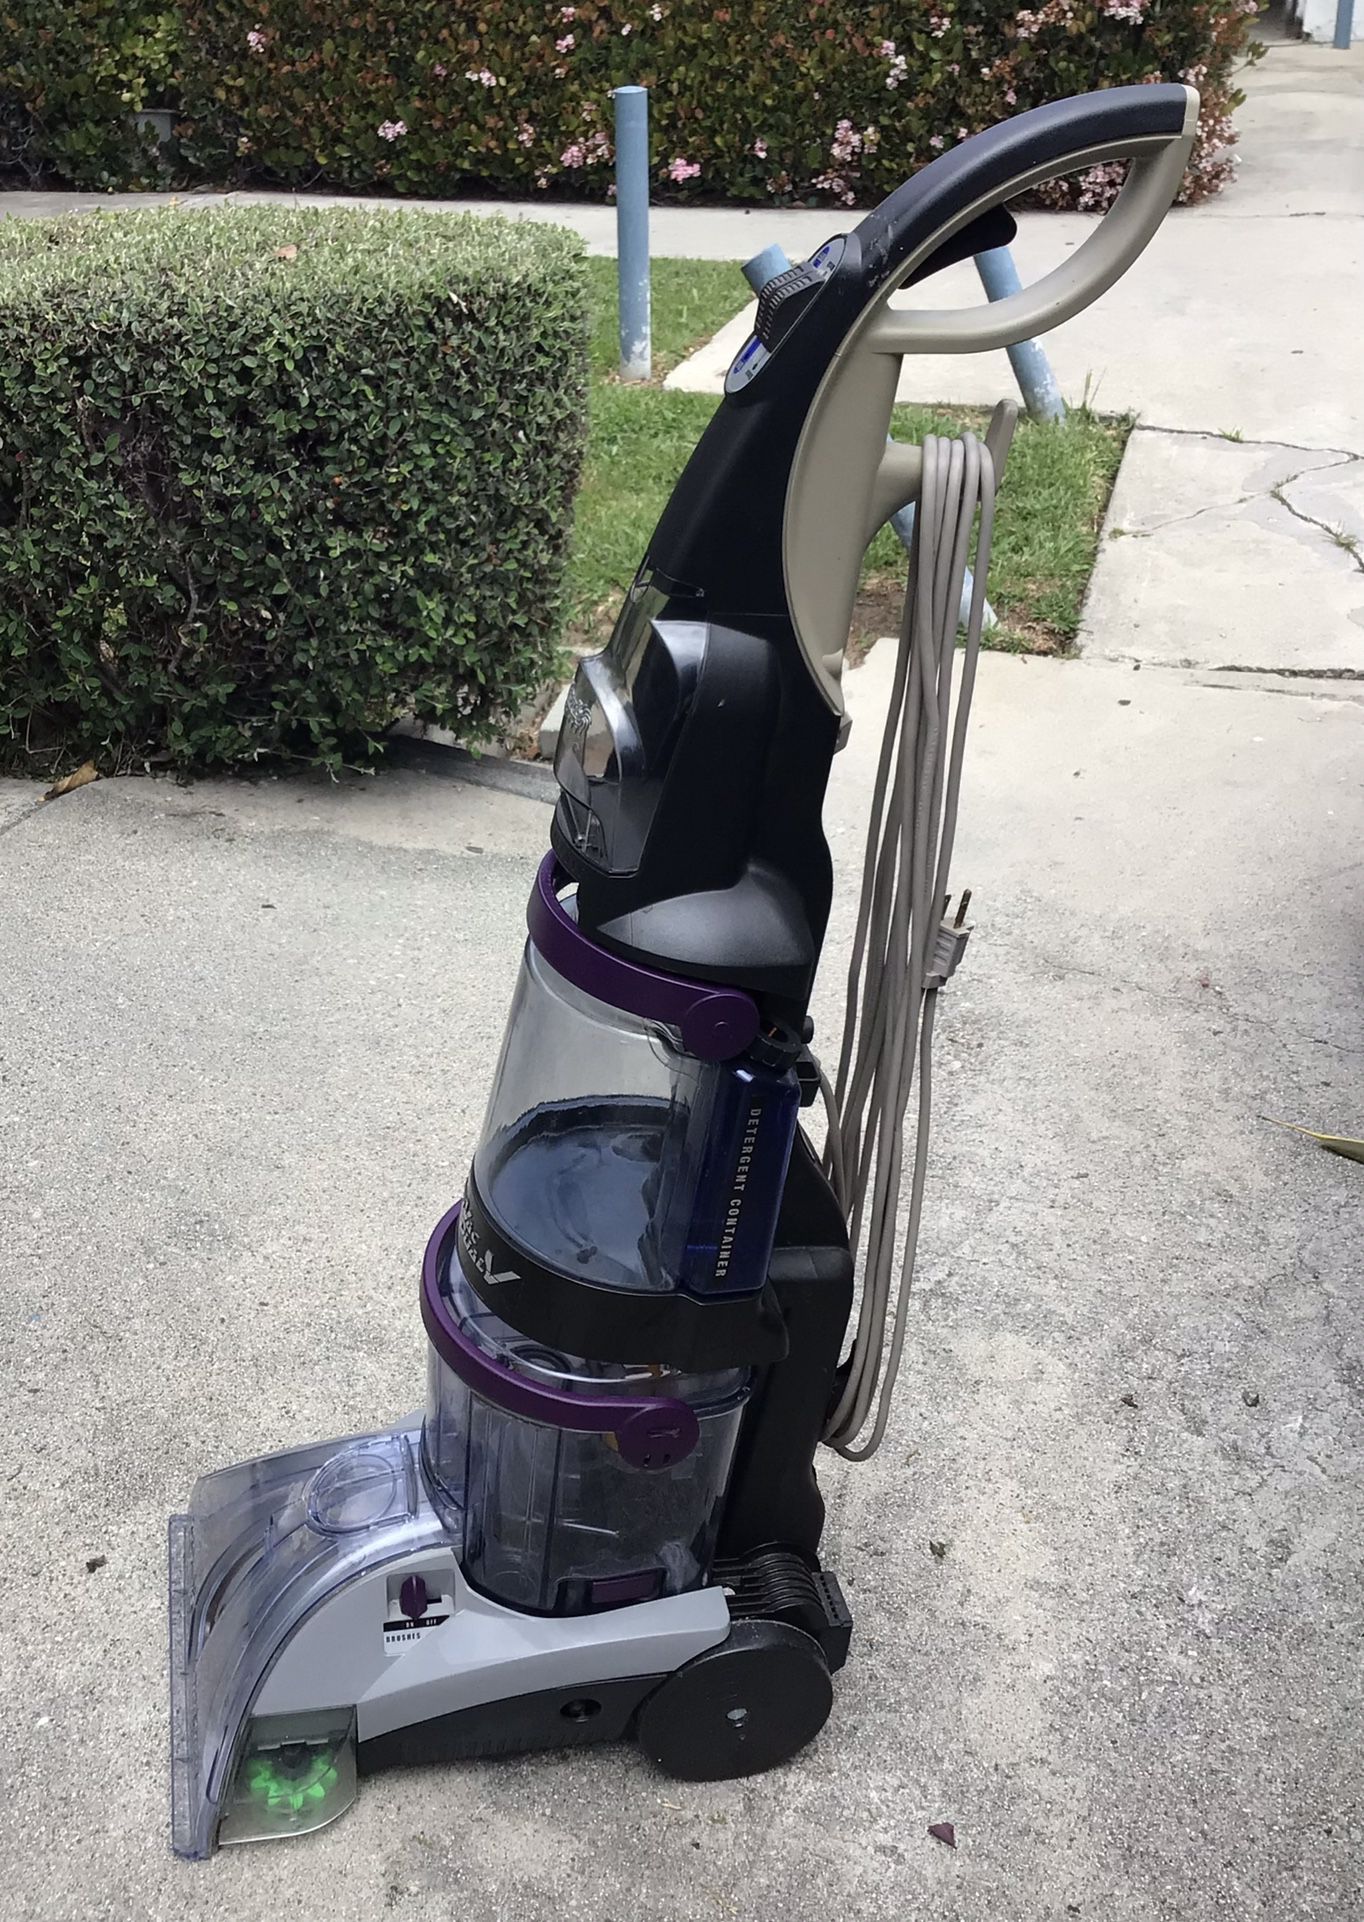 Hoover Steam Vac Dual..  With Spin Scrub Hand Tool..   $10. OBO